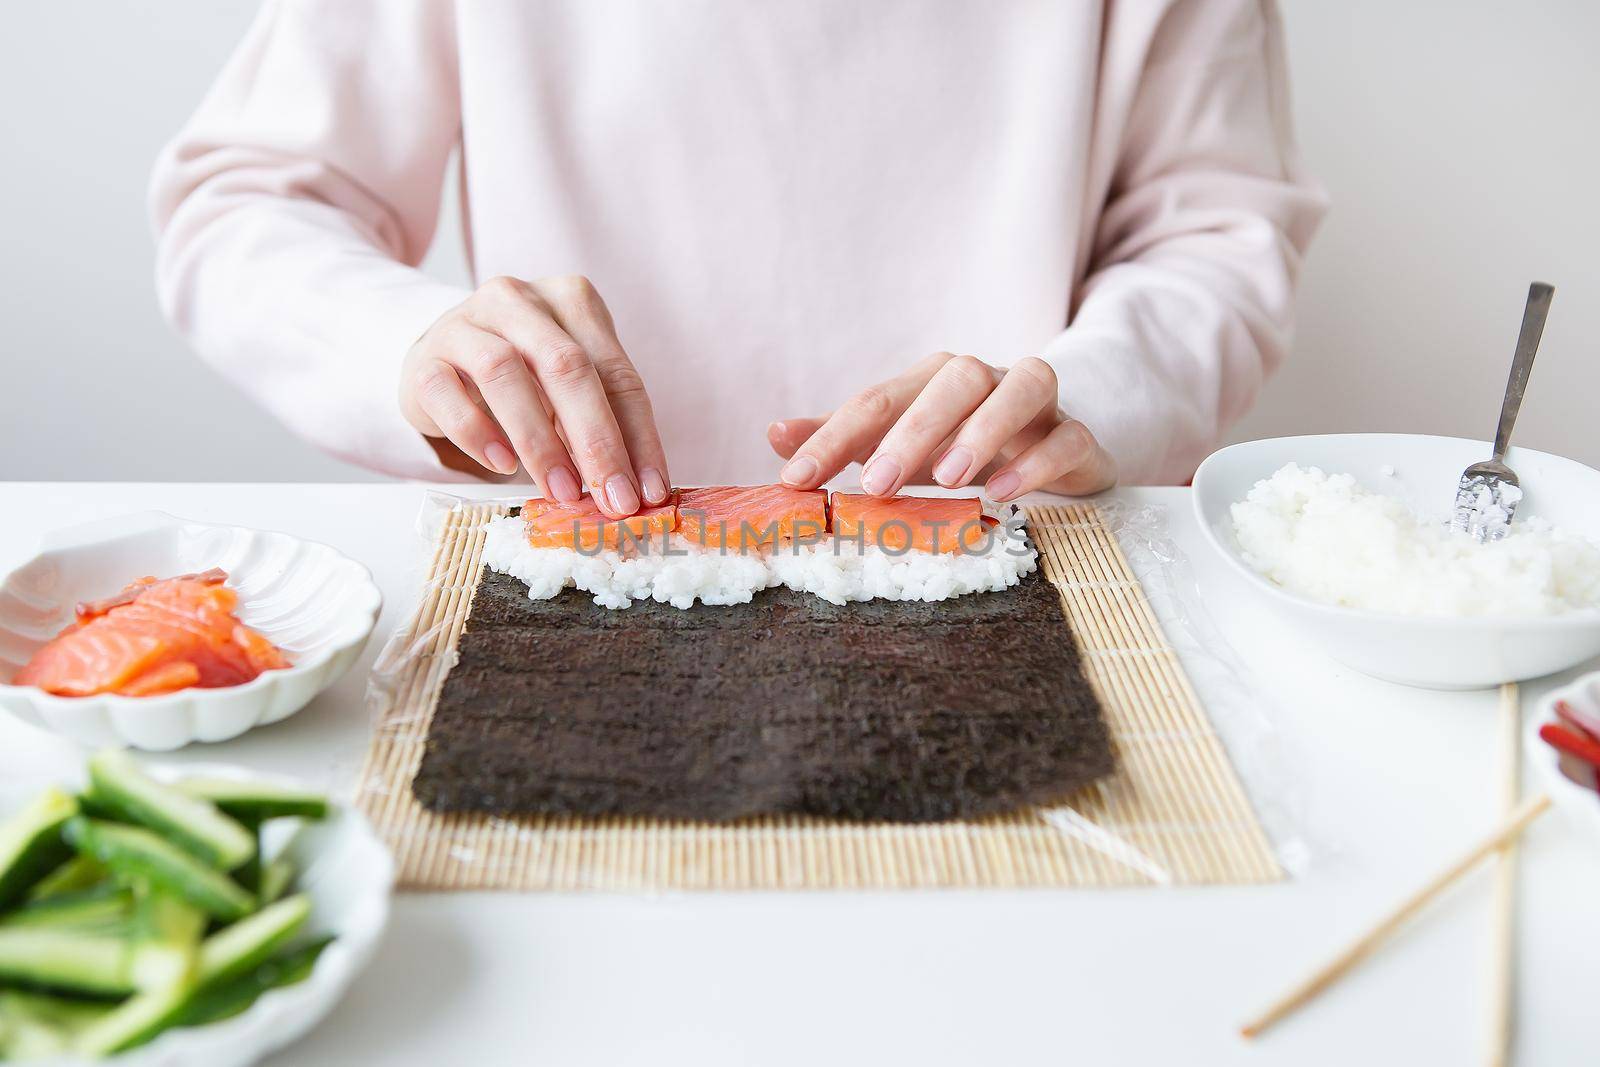 Sushi preparation process, the girl makes sushi with different flavors - fresh salmon, caviar, avocado, cucumber, ginger, rice